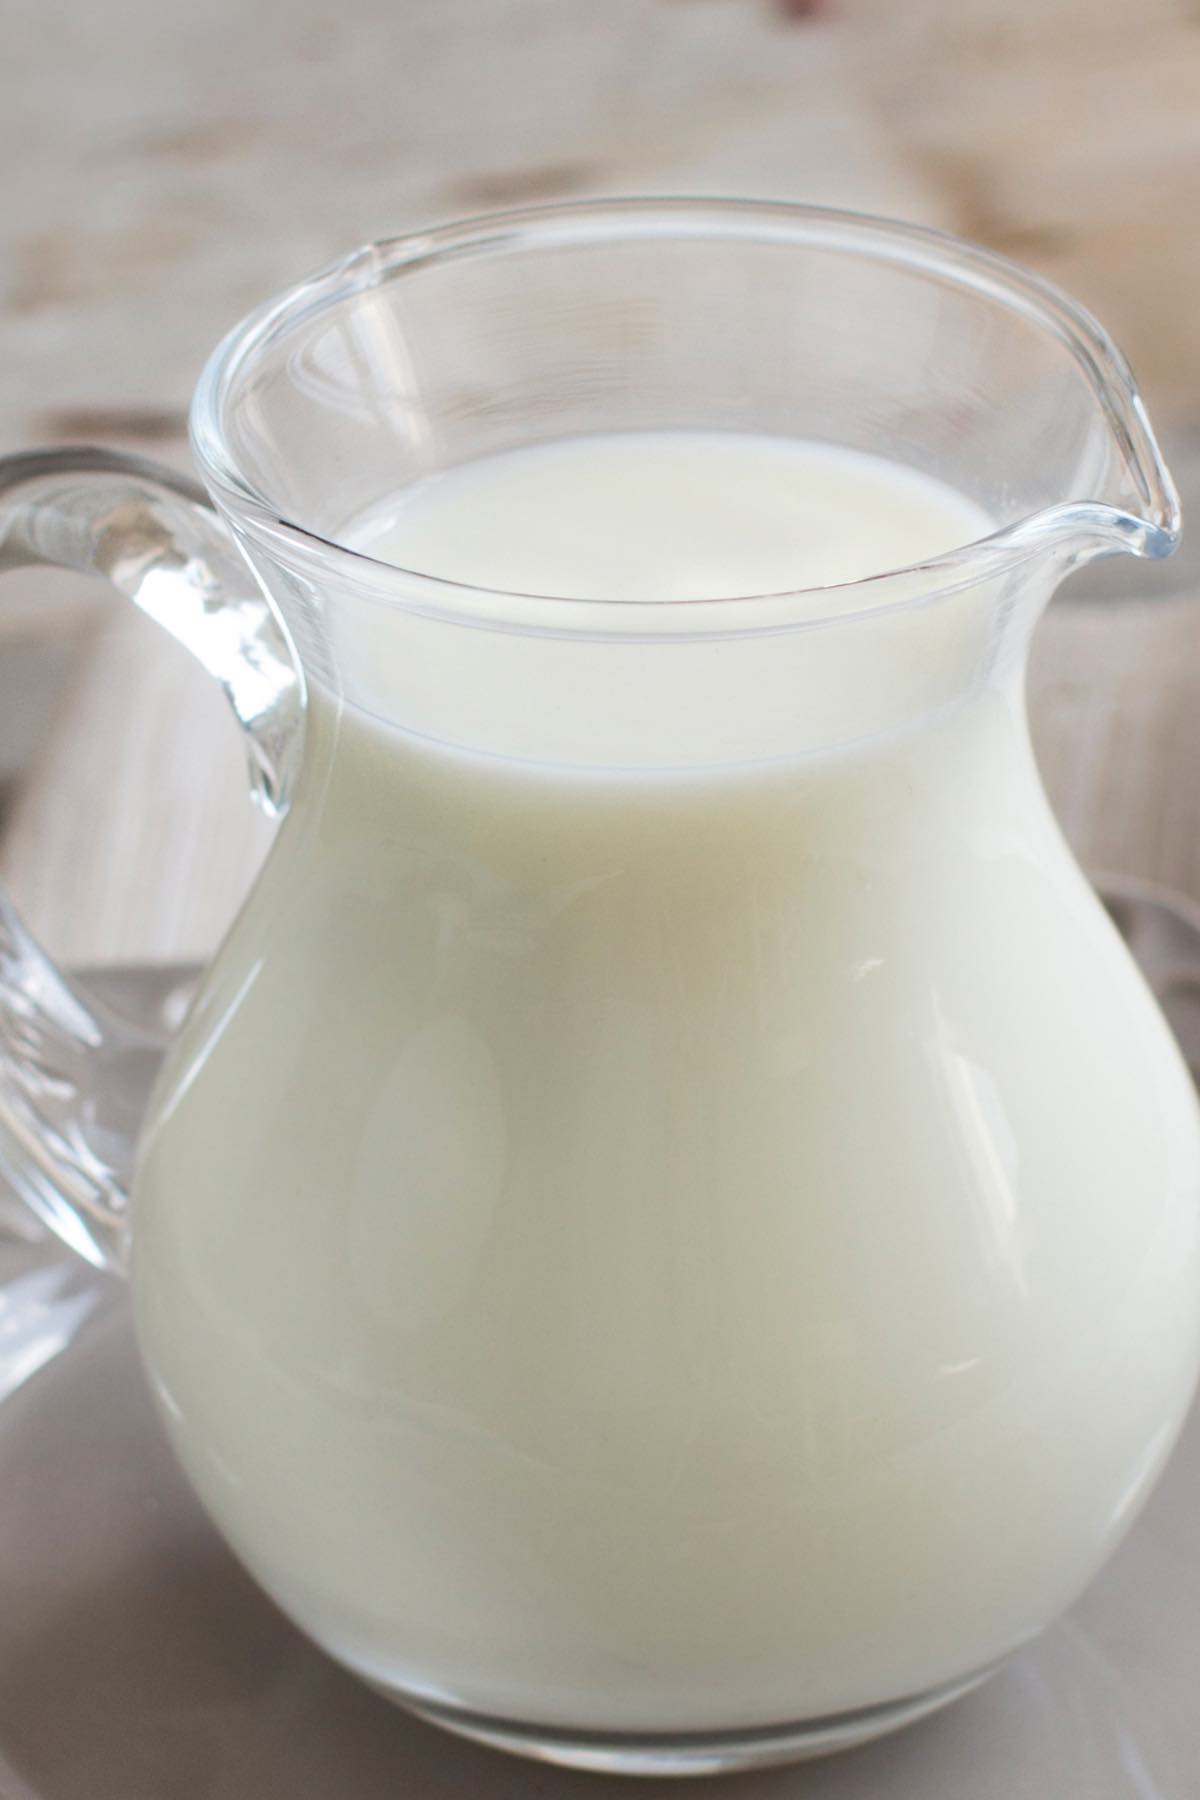 Many recipes call for heavy whipping cream. This staple ingredient is used in everything from desserts to soups to sauces. Don’t worry if you don’t have any on hand and can’t run out to the store. With 3 simple ingredients, you can make your very own heavy whipping cream at home easily.